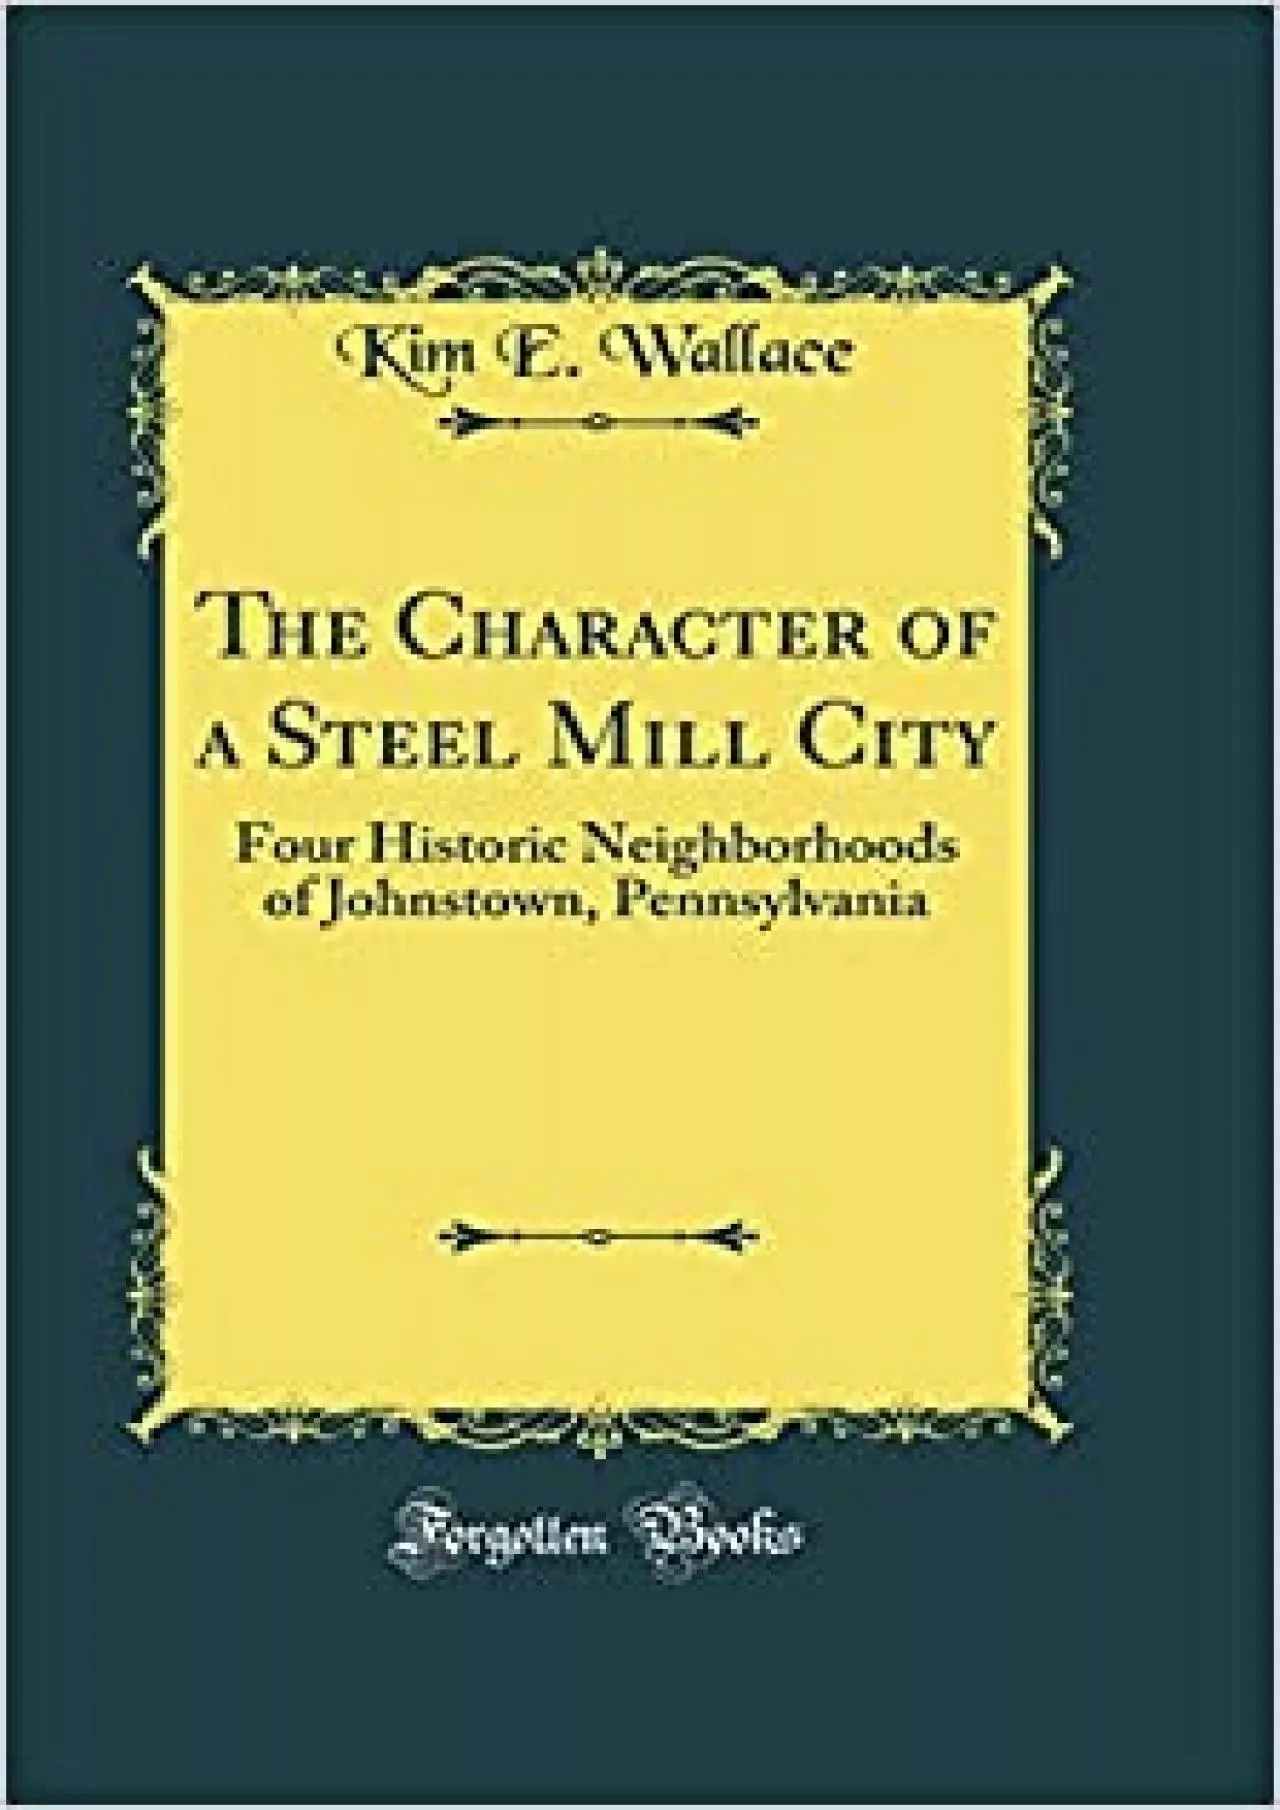 The Character of a Steel Mill City: Four Historic Neighborhoods of Johnstown Pennsylvania